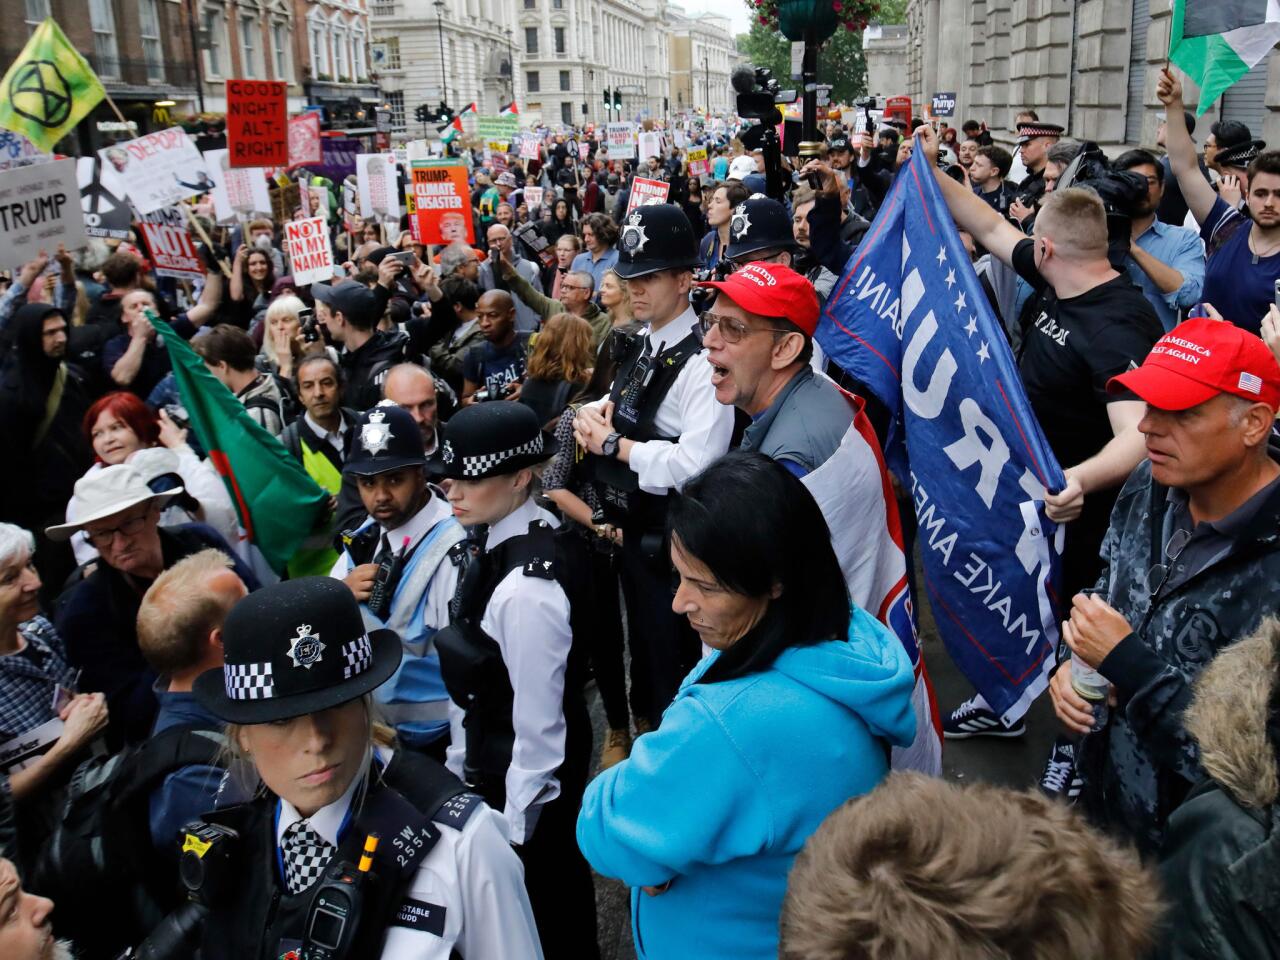 Police form a barrier between pro and anti-Trump protesters along whitehall in London on the second day of Trump's three-day state visit to Britain. -